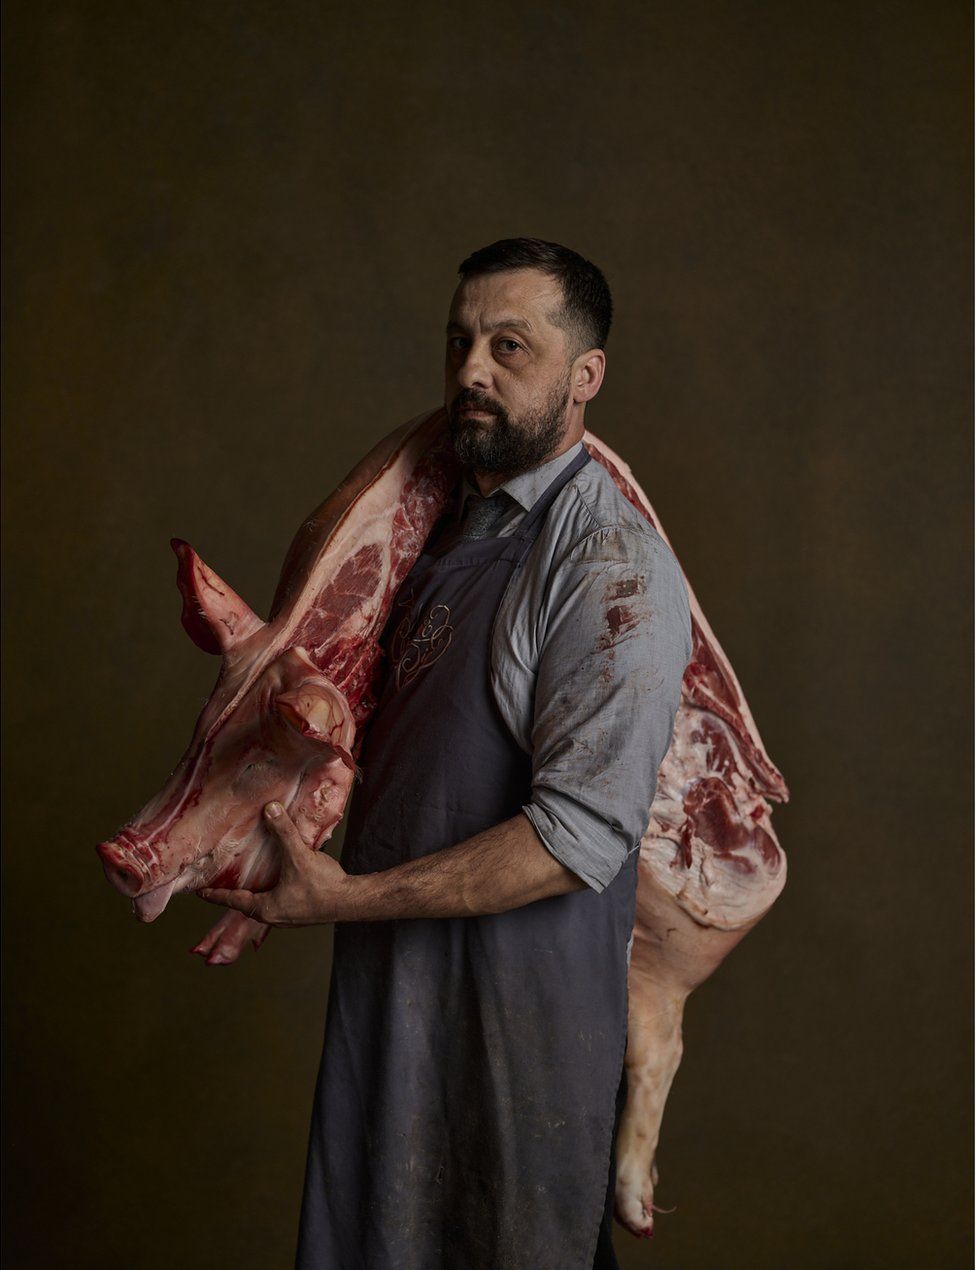 A butcher stands with a pig's carcass slung over his shoulder